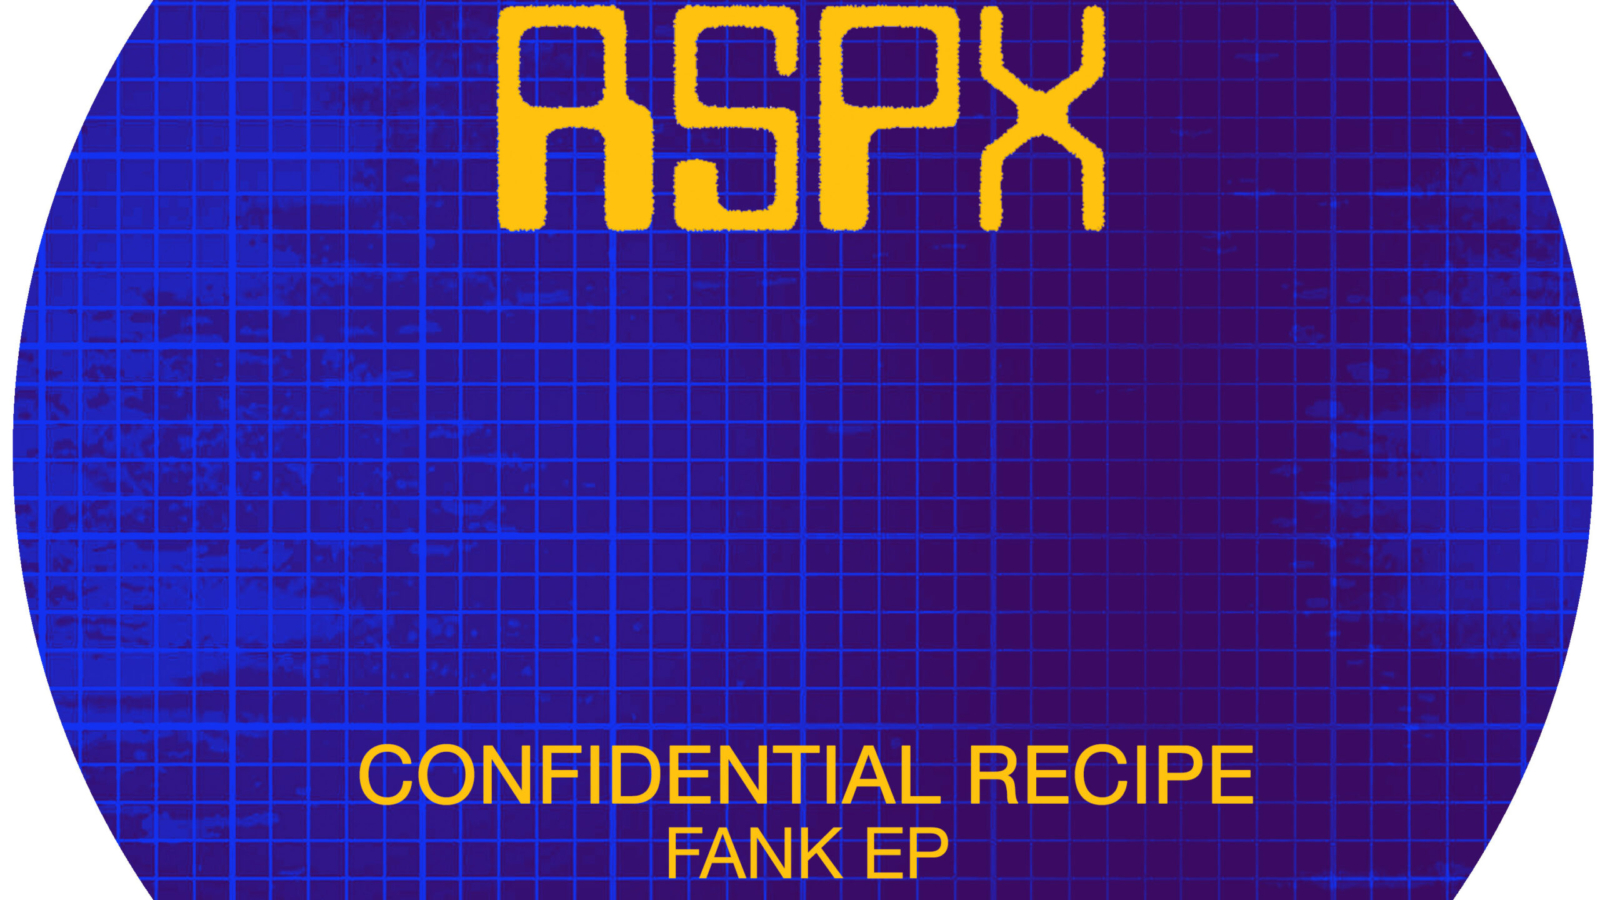 PACK SHOT Confidential Recipe - FANK EP - Rekids Special Projects